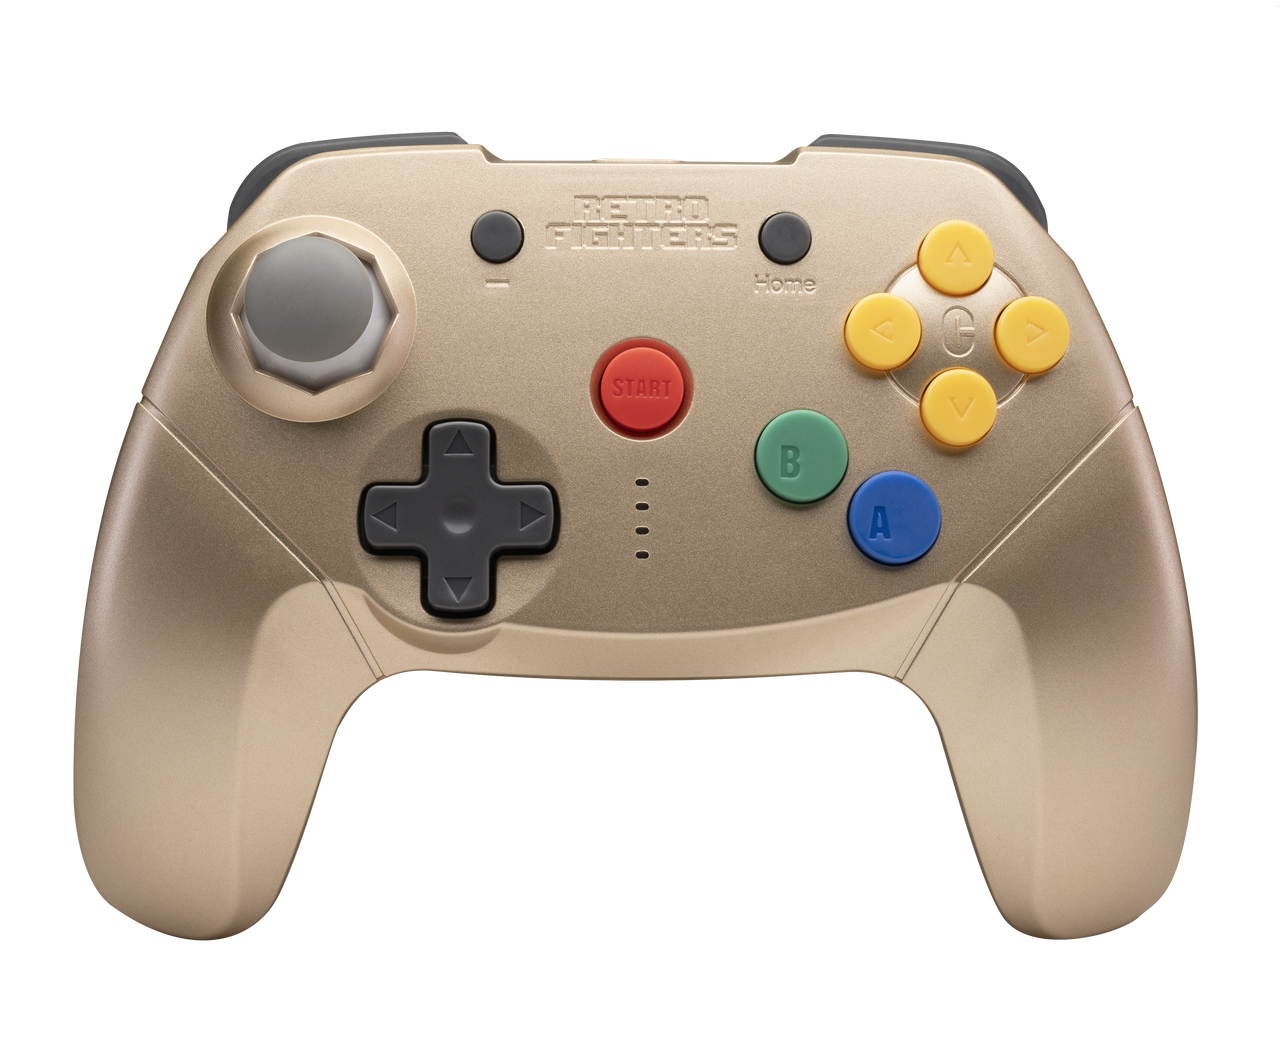 Video: The Nintendo 64 Controller Works With Any Switch Game (Kinda)